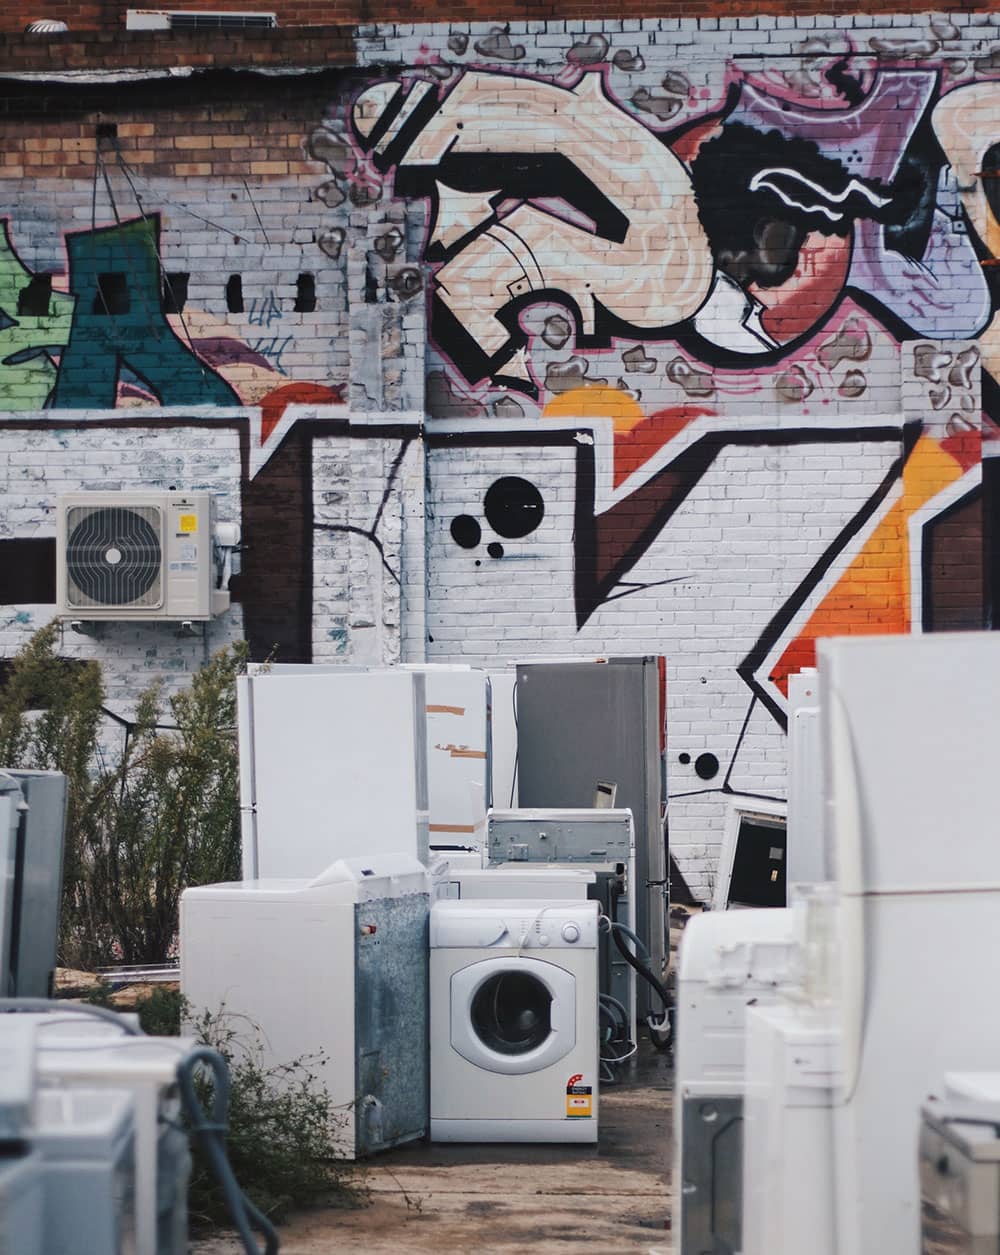 white goods wasting for recycling